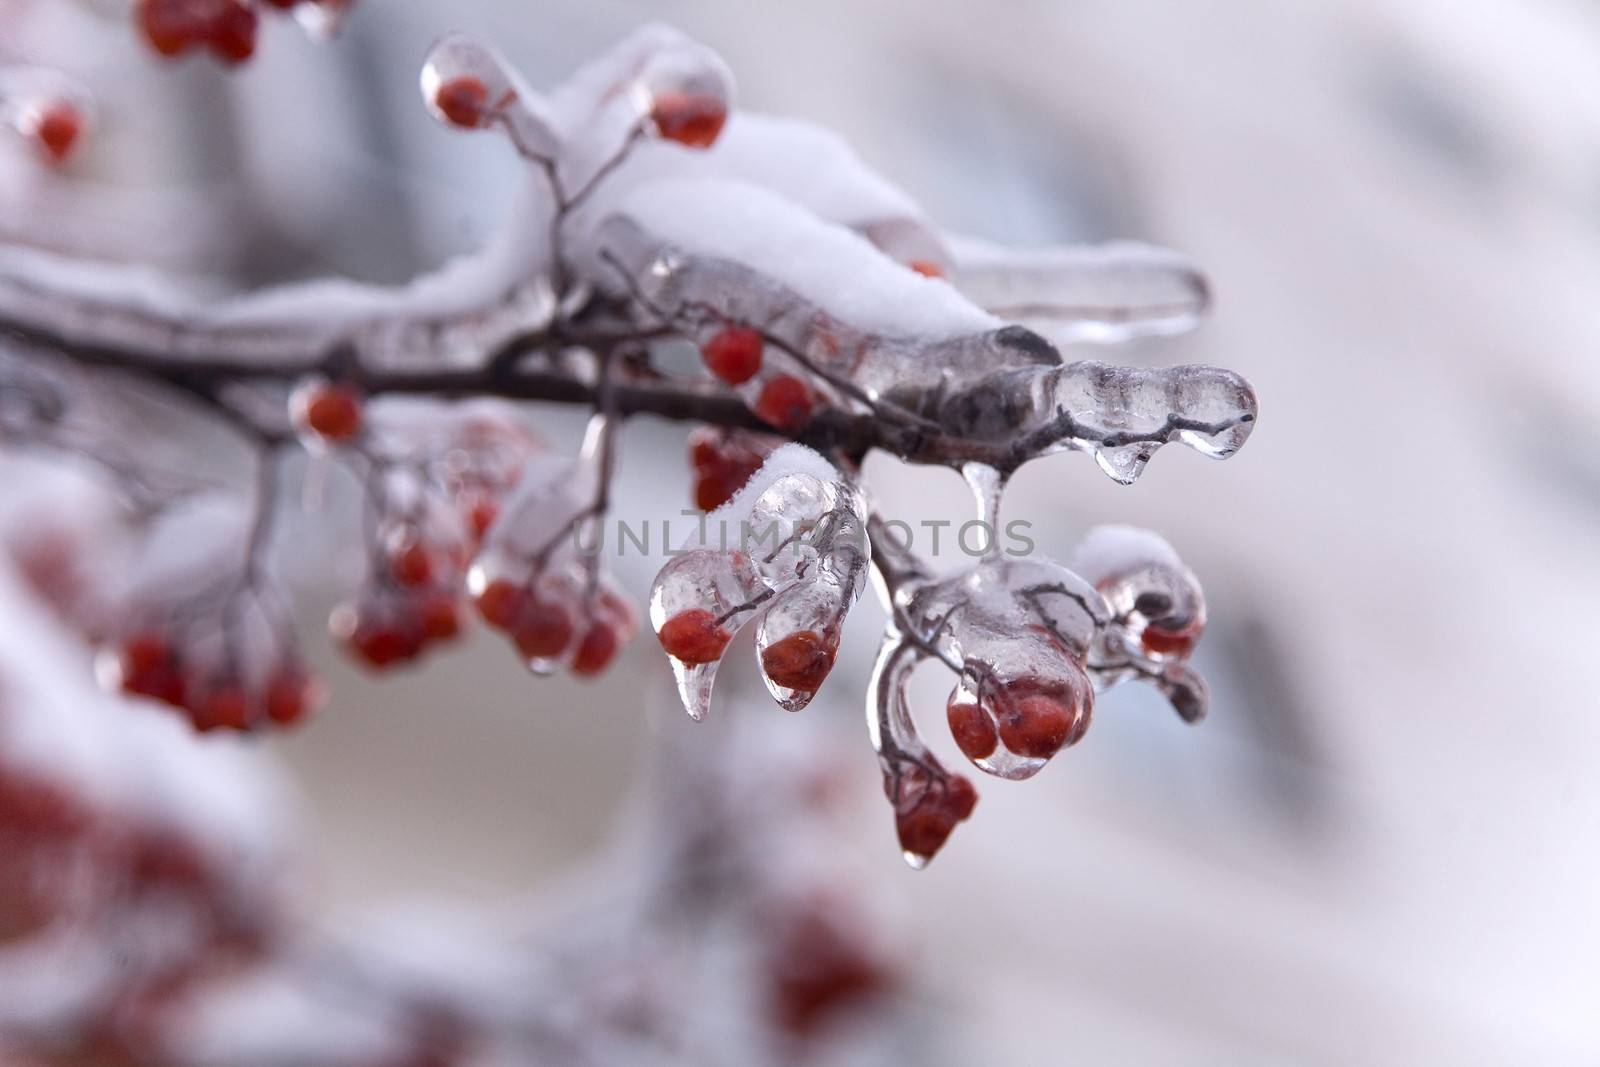  Frozen ashberry by foryouinf